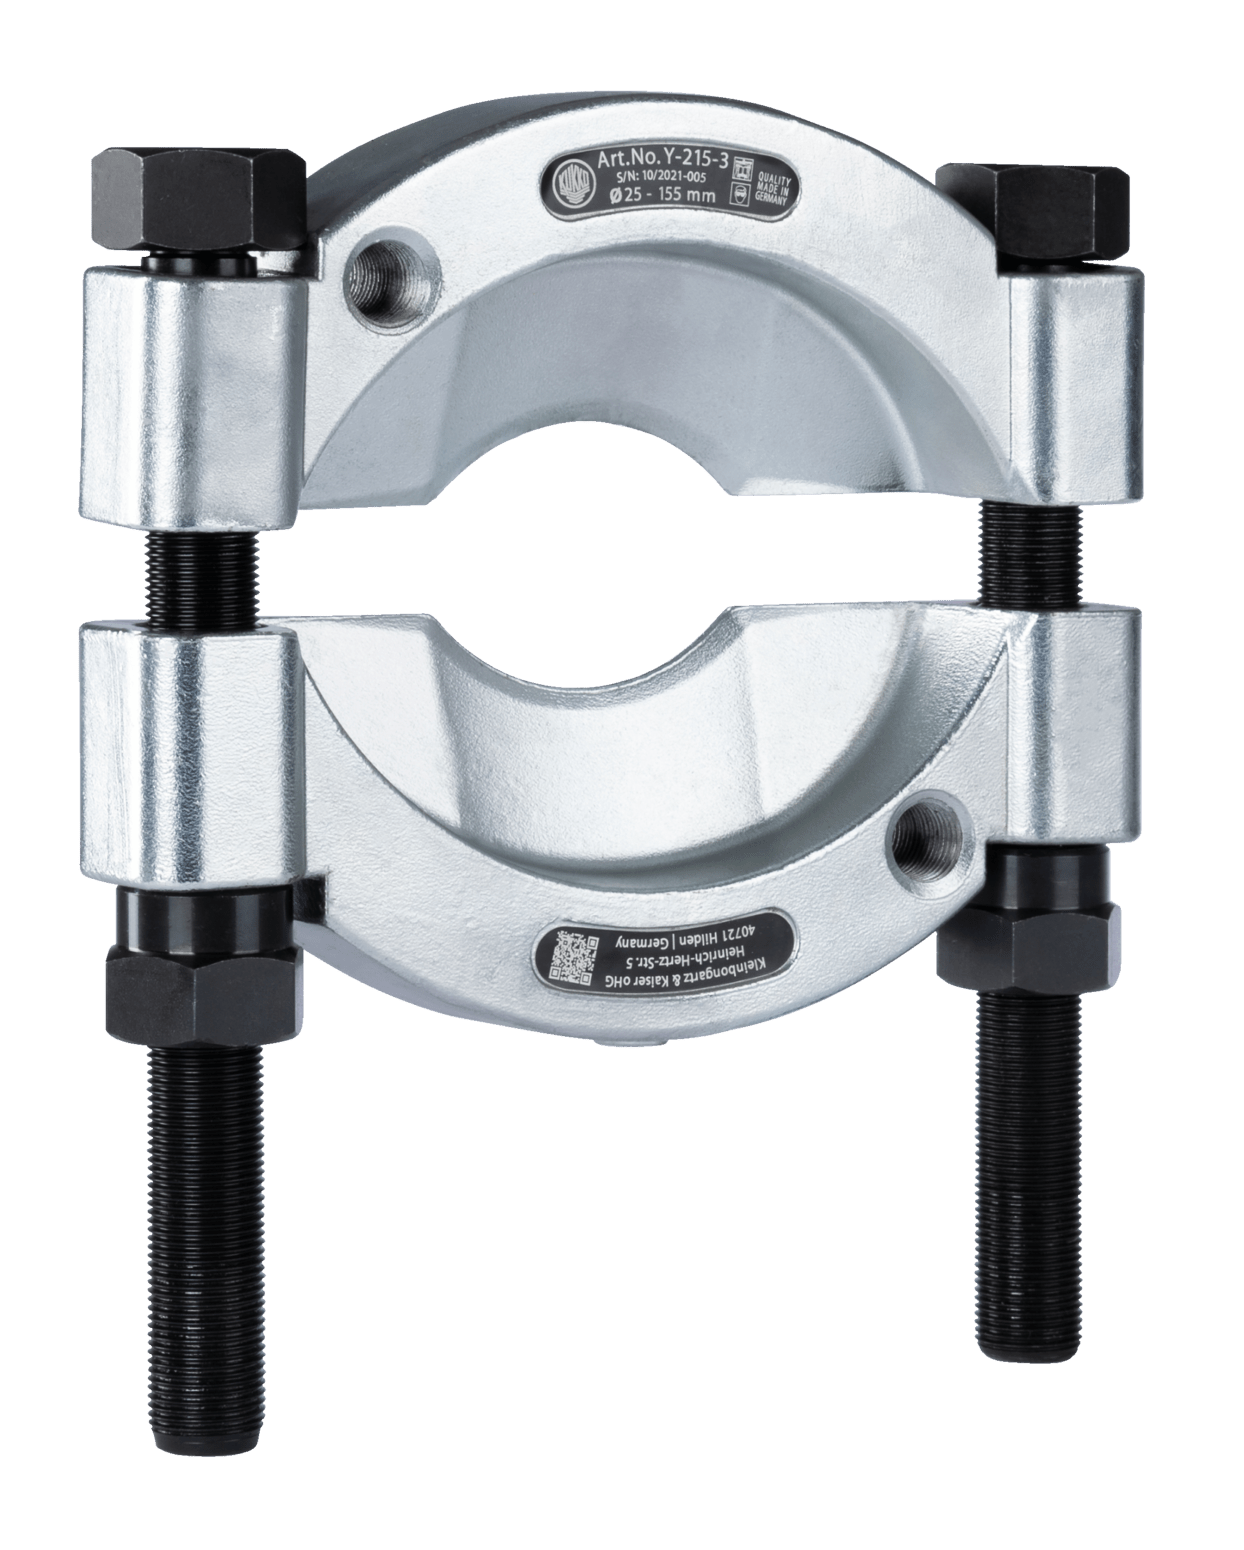 Kukko Y-515-5 Disconnecting device for hydraulic puller/puller - Apollo Industries llc